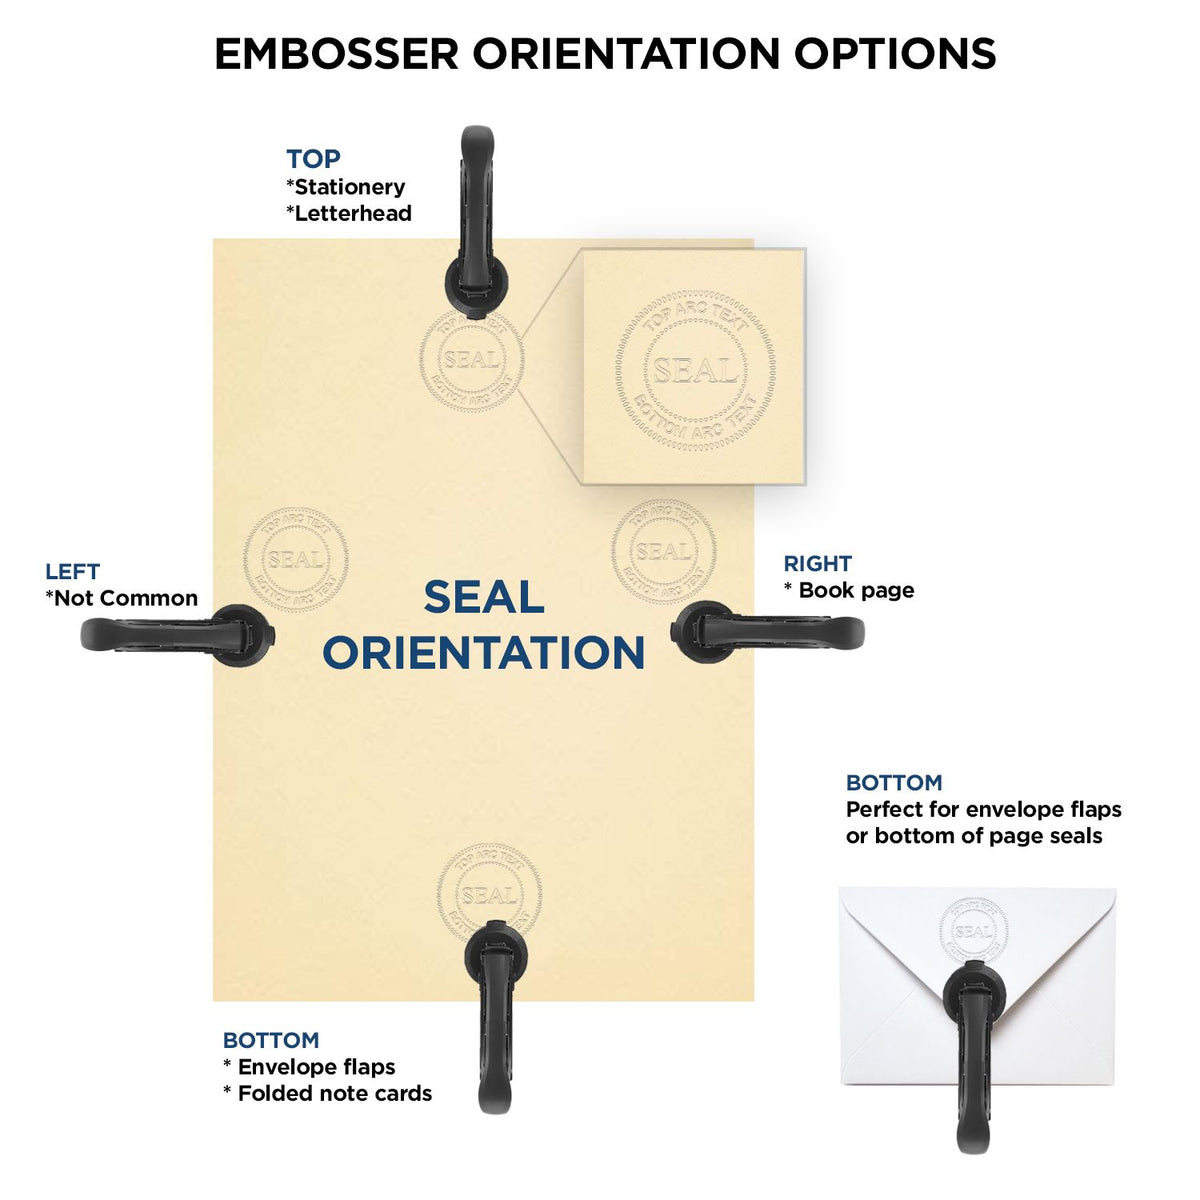 An infographic for the State of Virginia Extended Long Reach Engineer Seal showing embosser orientation, this is showing examples of a top, bottom, right and left insert.